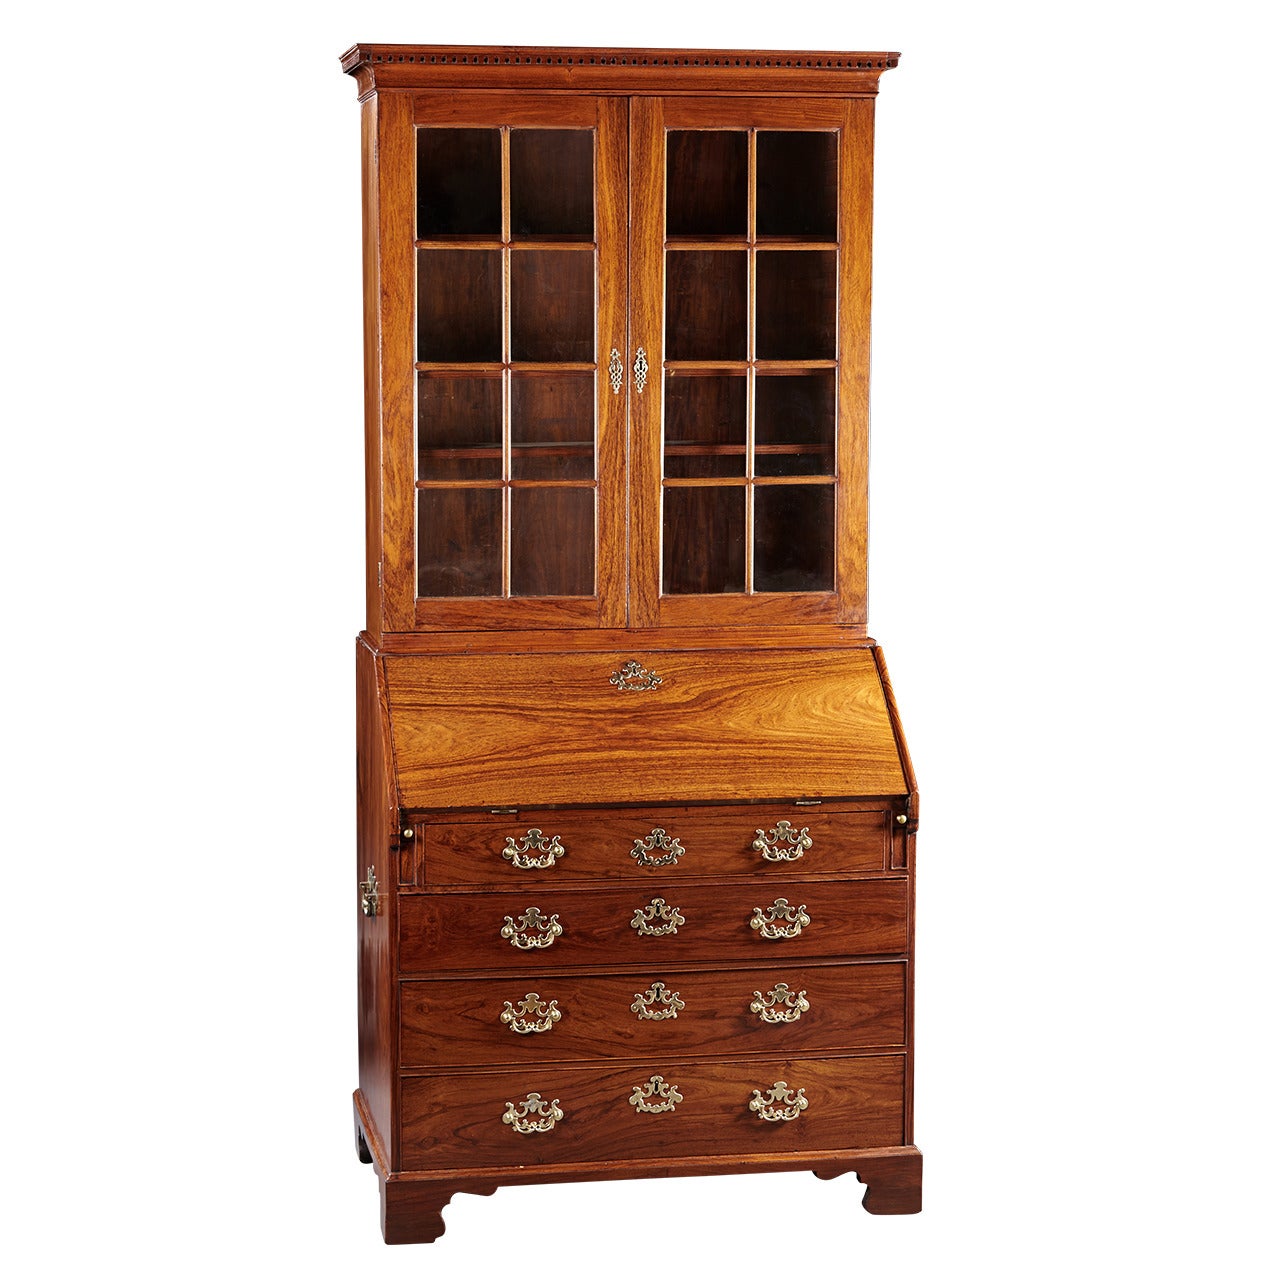 Remarkable and Rare Rosewood Bureau Bookcase for the English Market For Sale